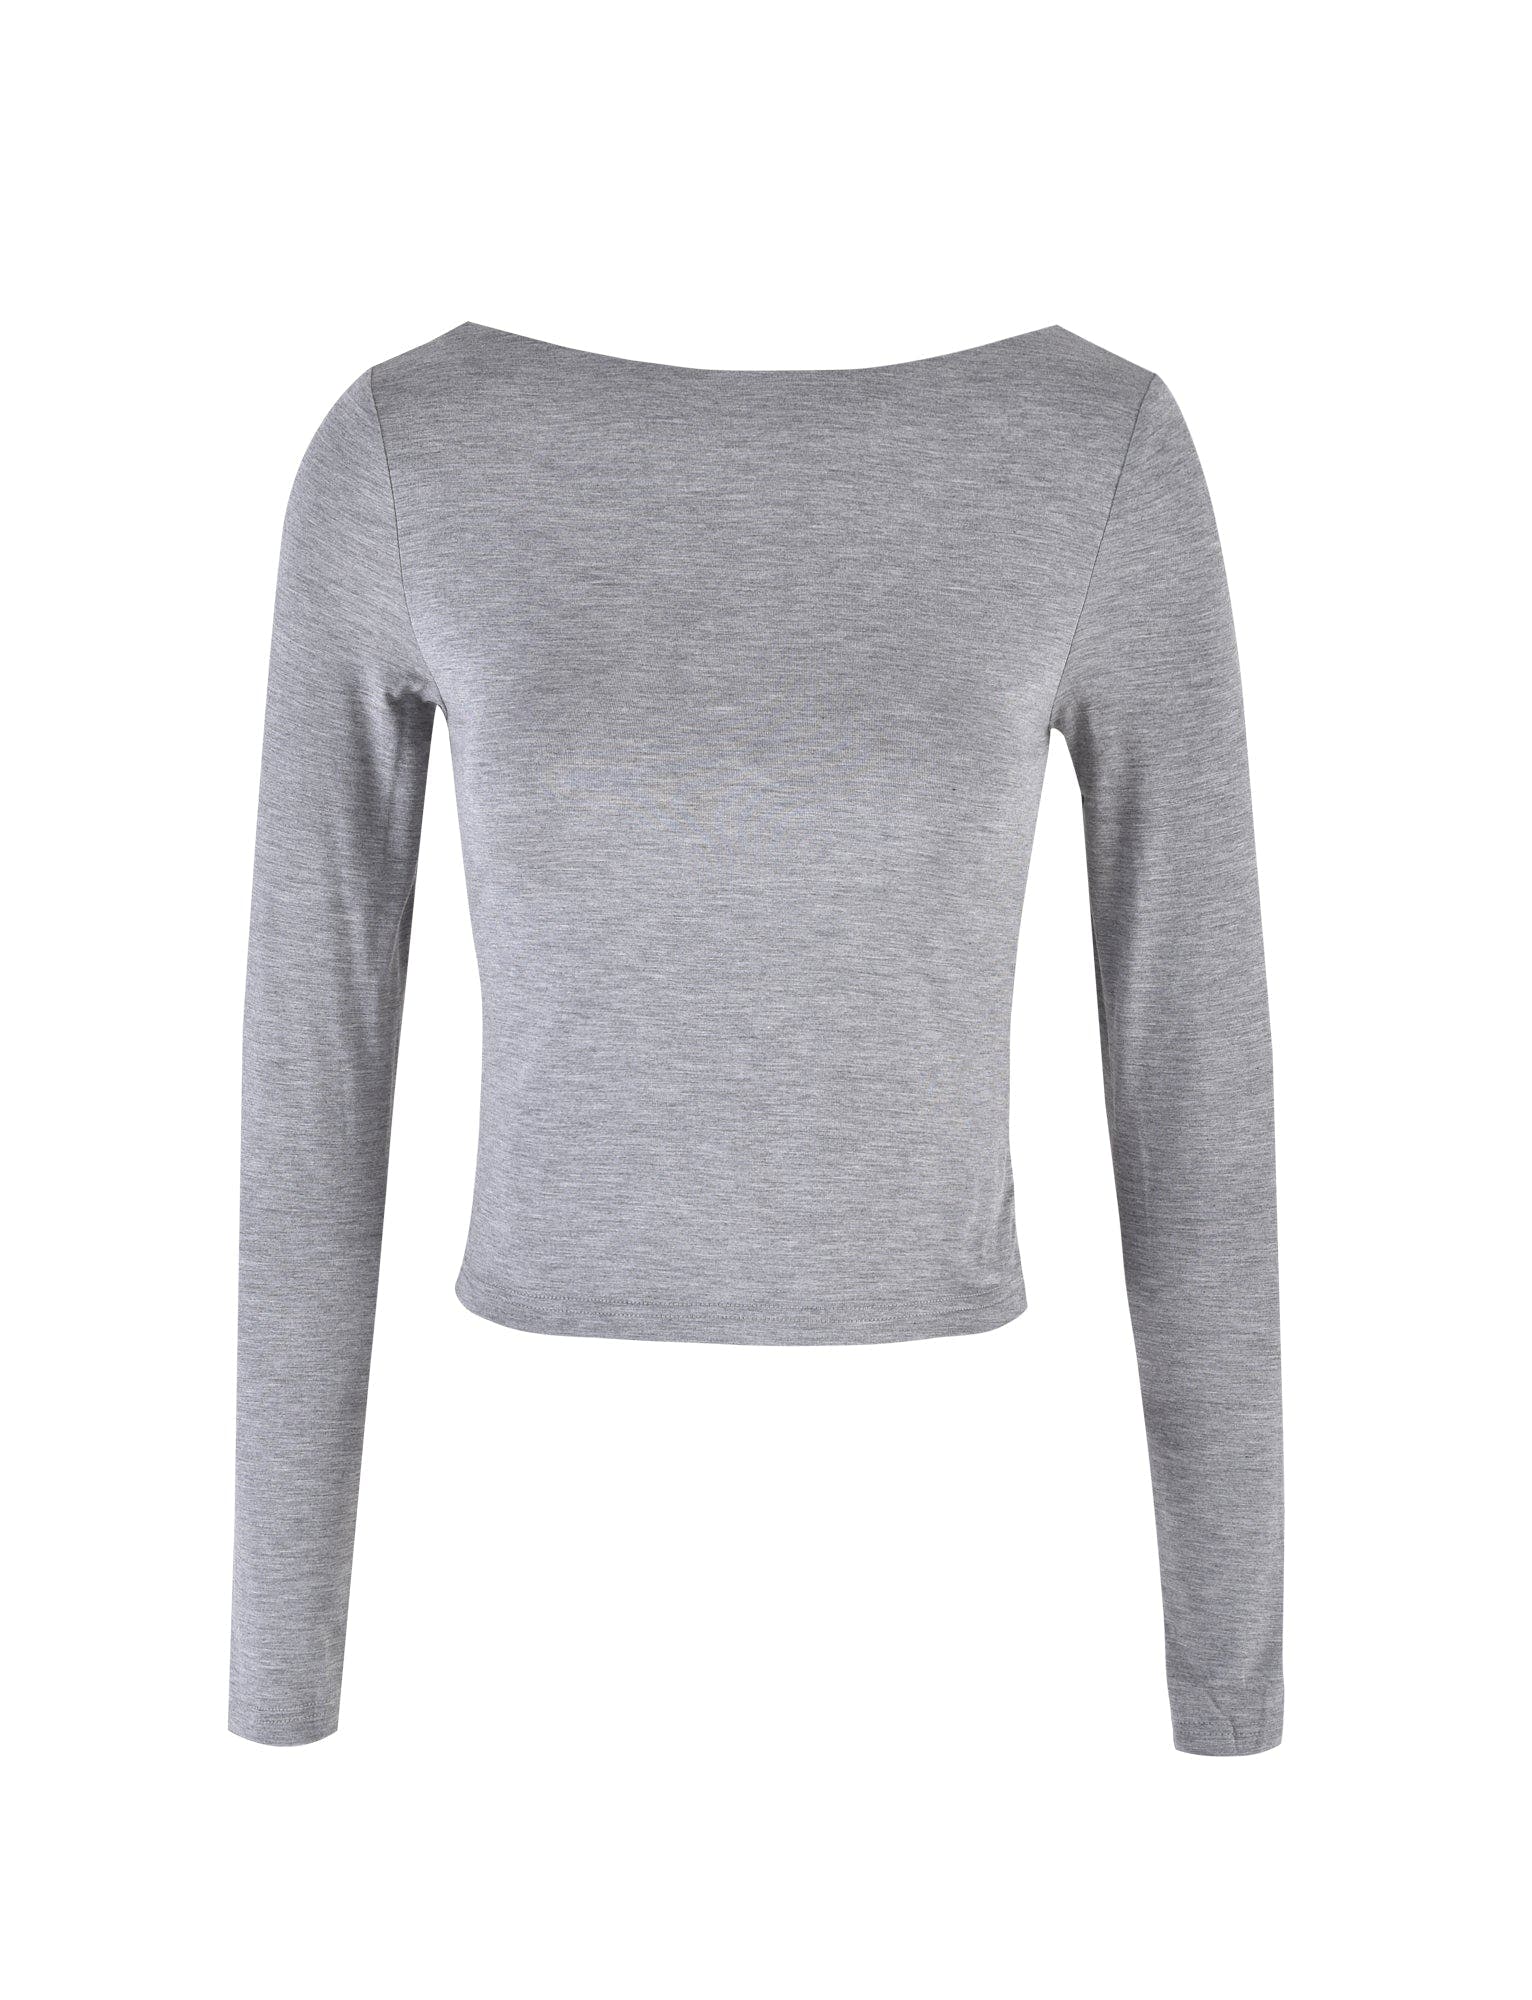 QUINNELL TOP - GREY